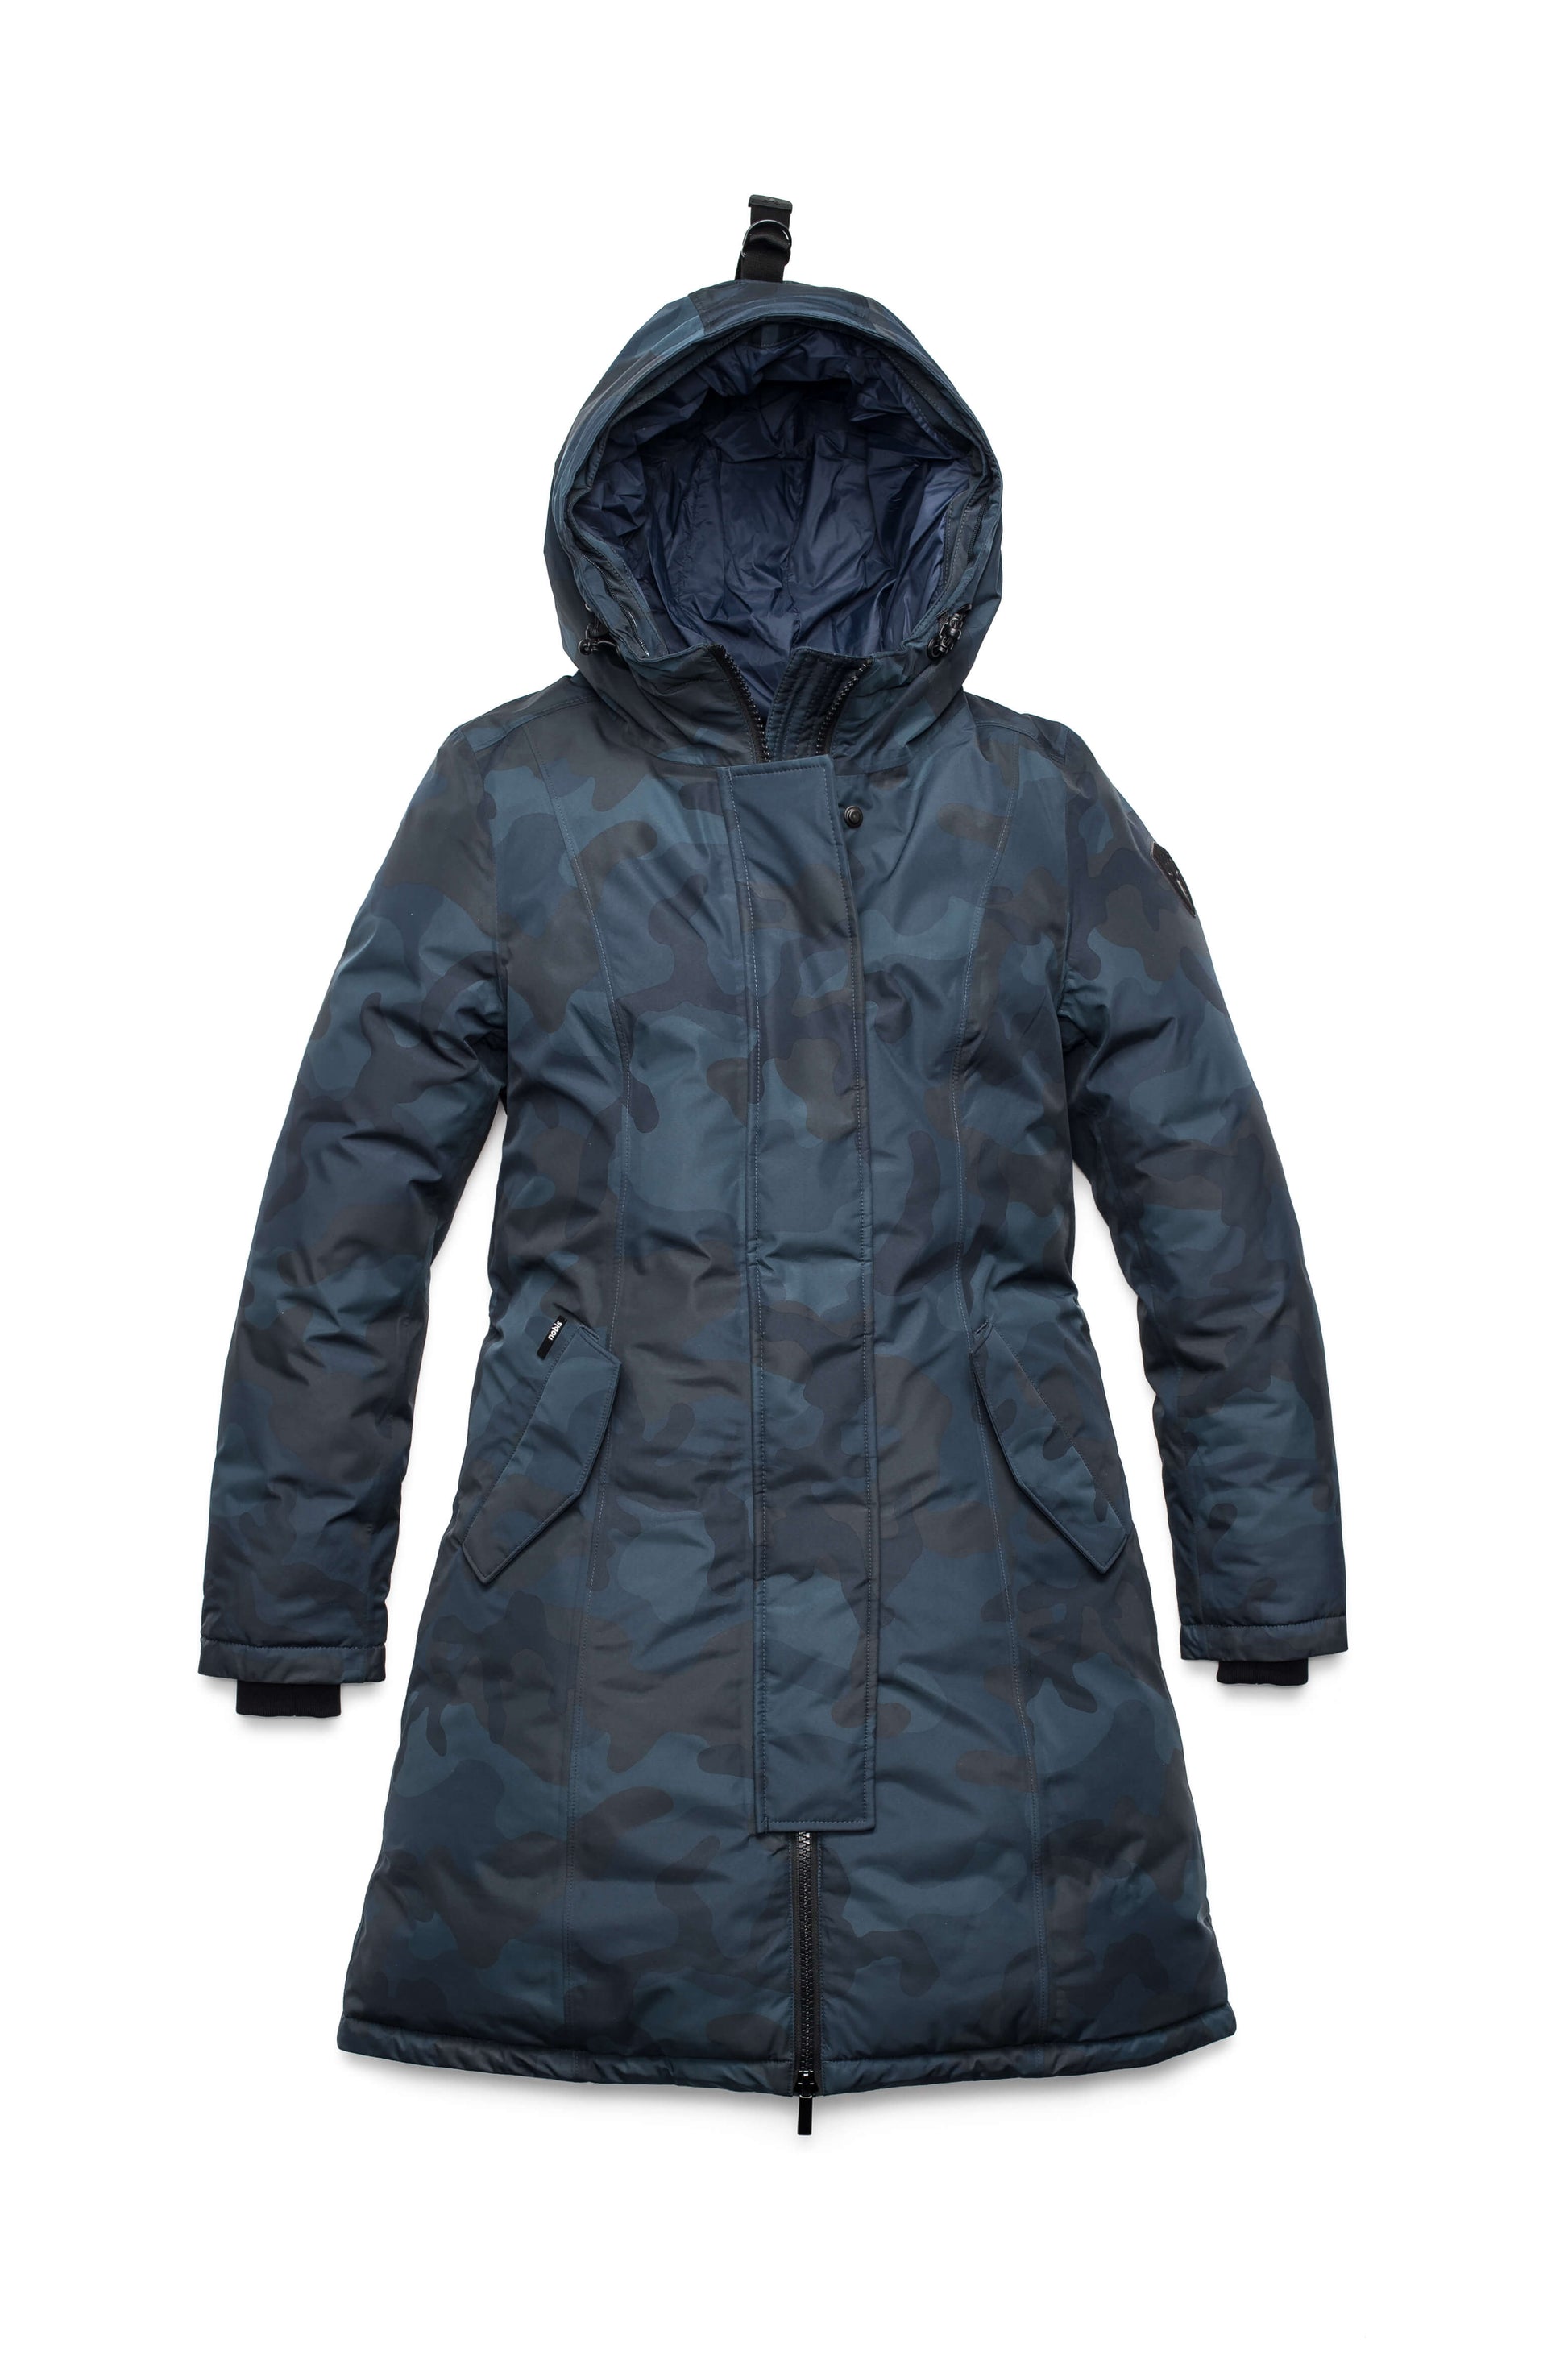 Ladies thigh length down-filled parka with non-removable hood in Navy Camo